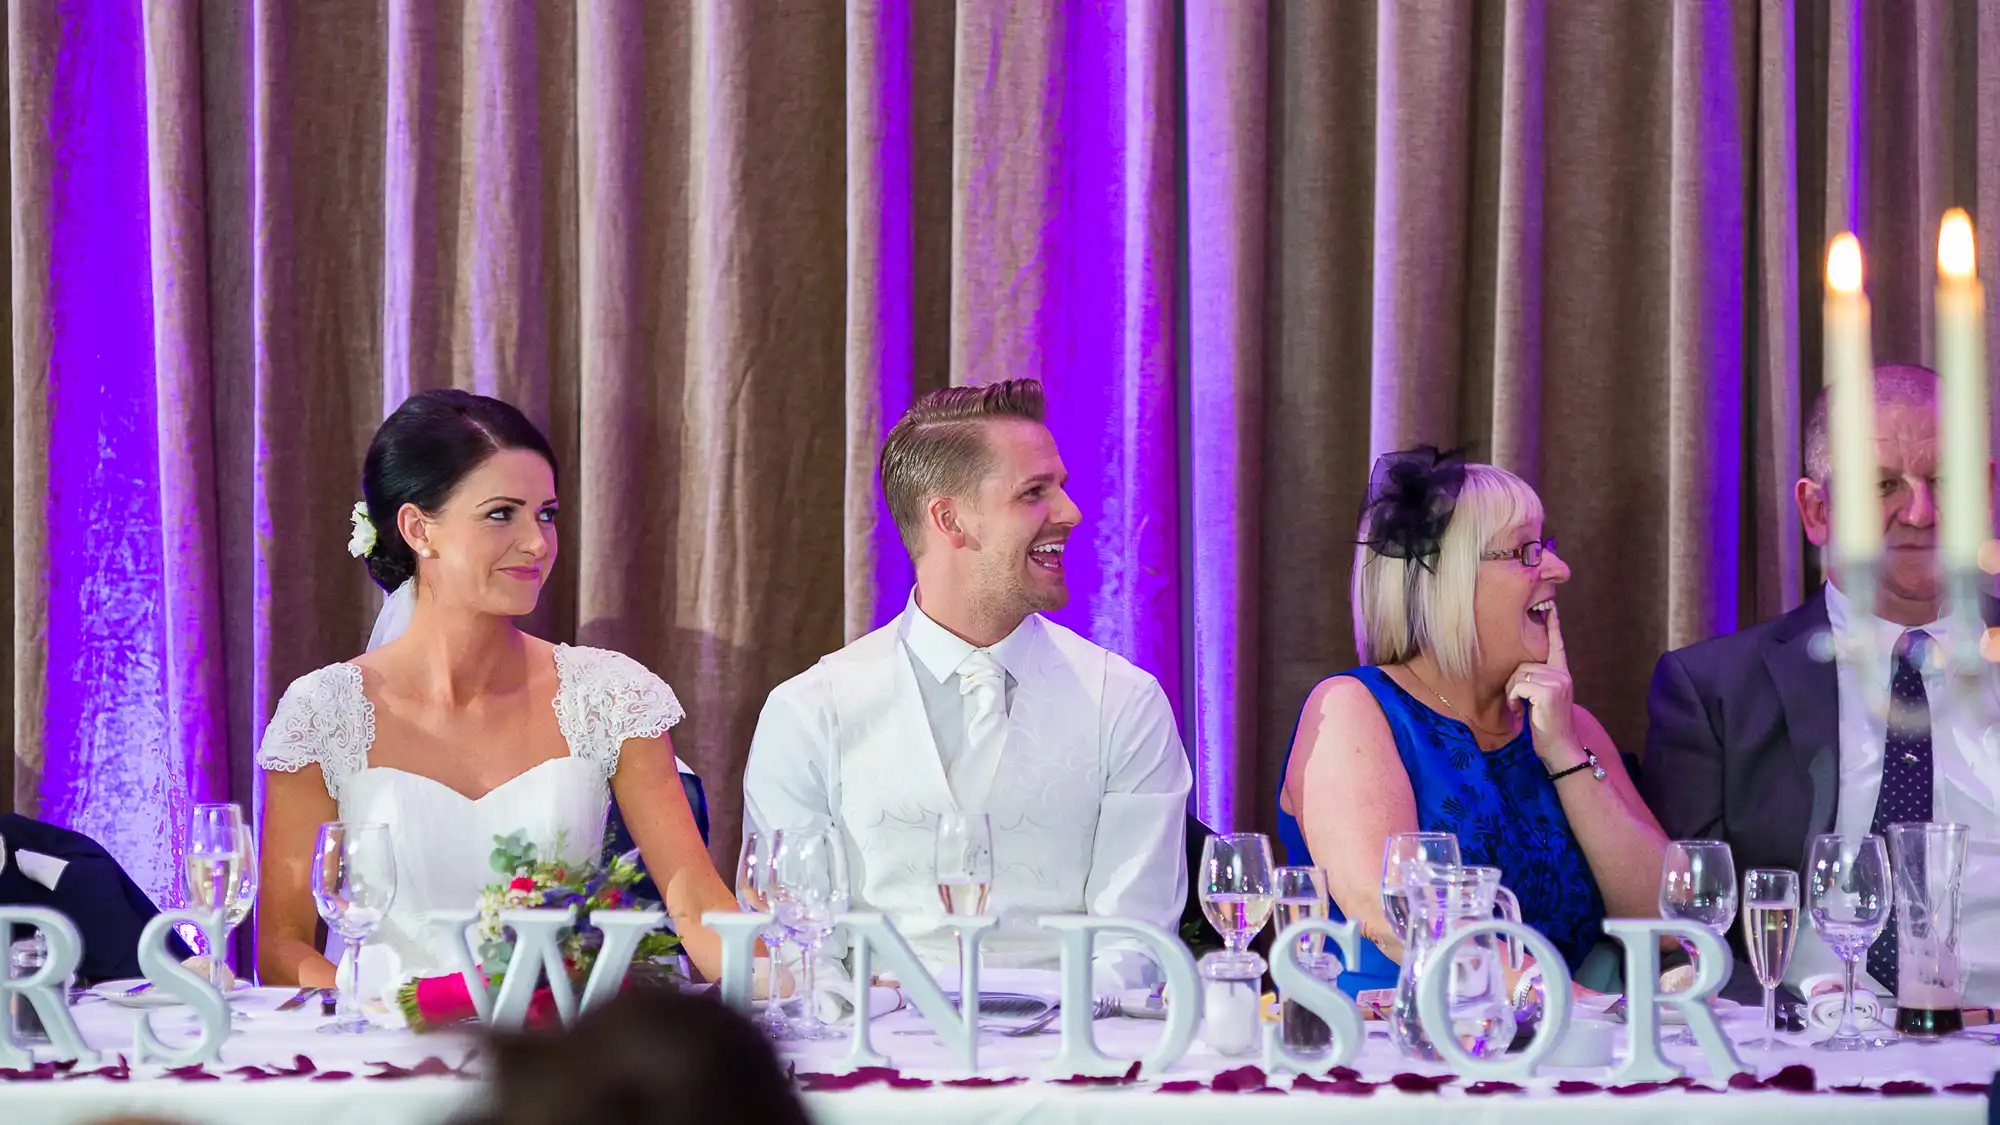 A bride and groom seated at a banquet table with a guest, all smiling, in a room with purple lighting and elegant decor.